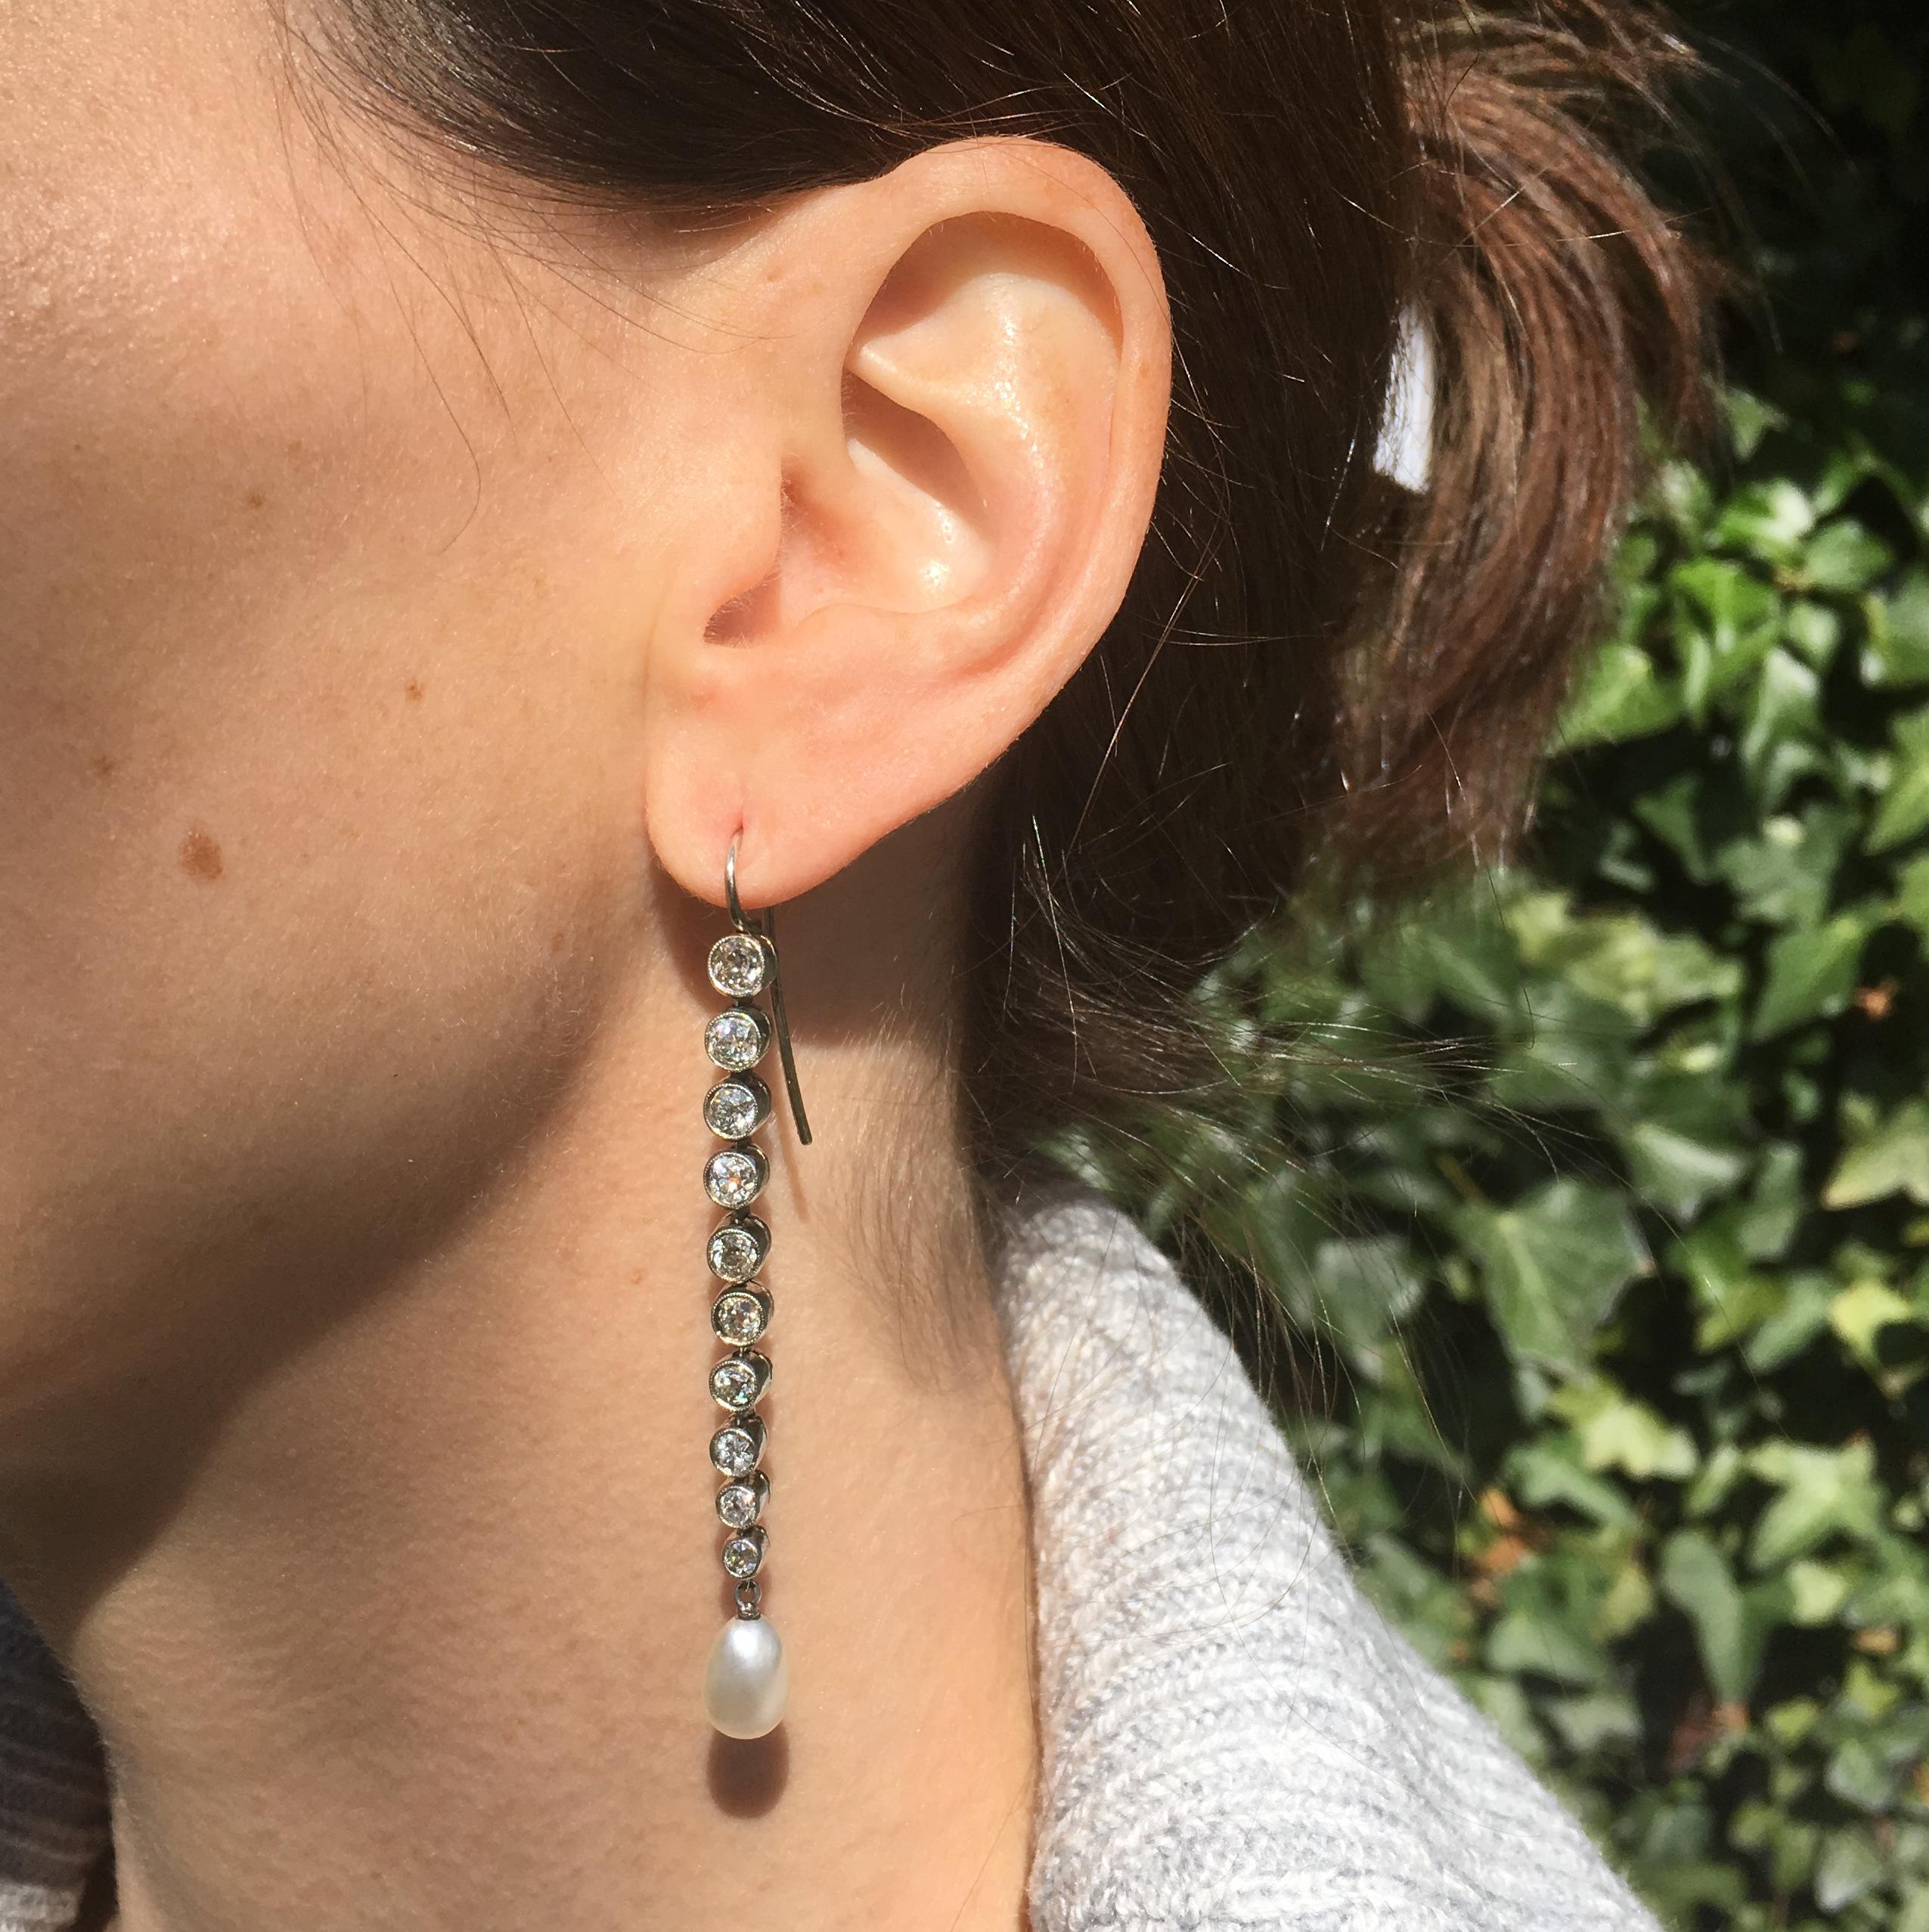 A dazzling and impressive pair of long drop earrings. The ten old cut diamond of graduating size are each set in it’s own milgrained “bezel.” Each earring is fully articulated, and culminating in a creamy and lustrous natural pearl. A